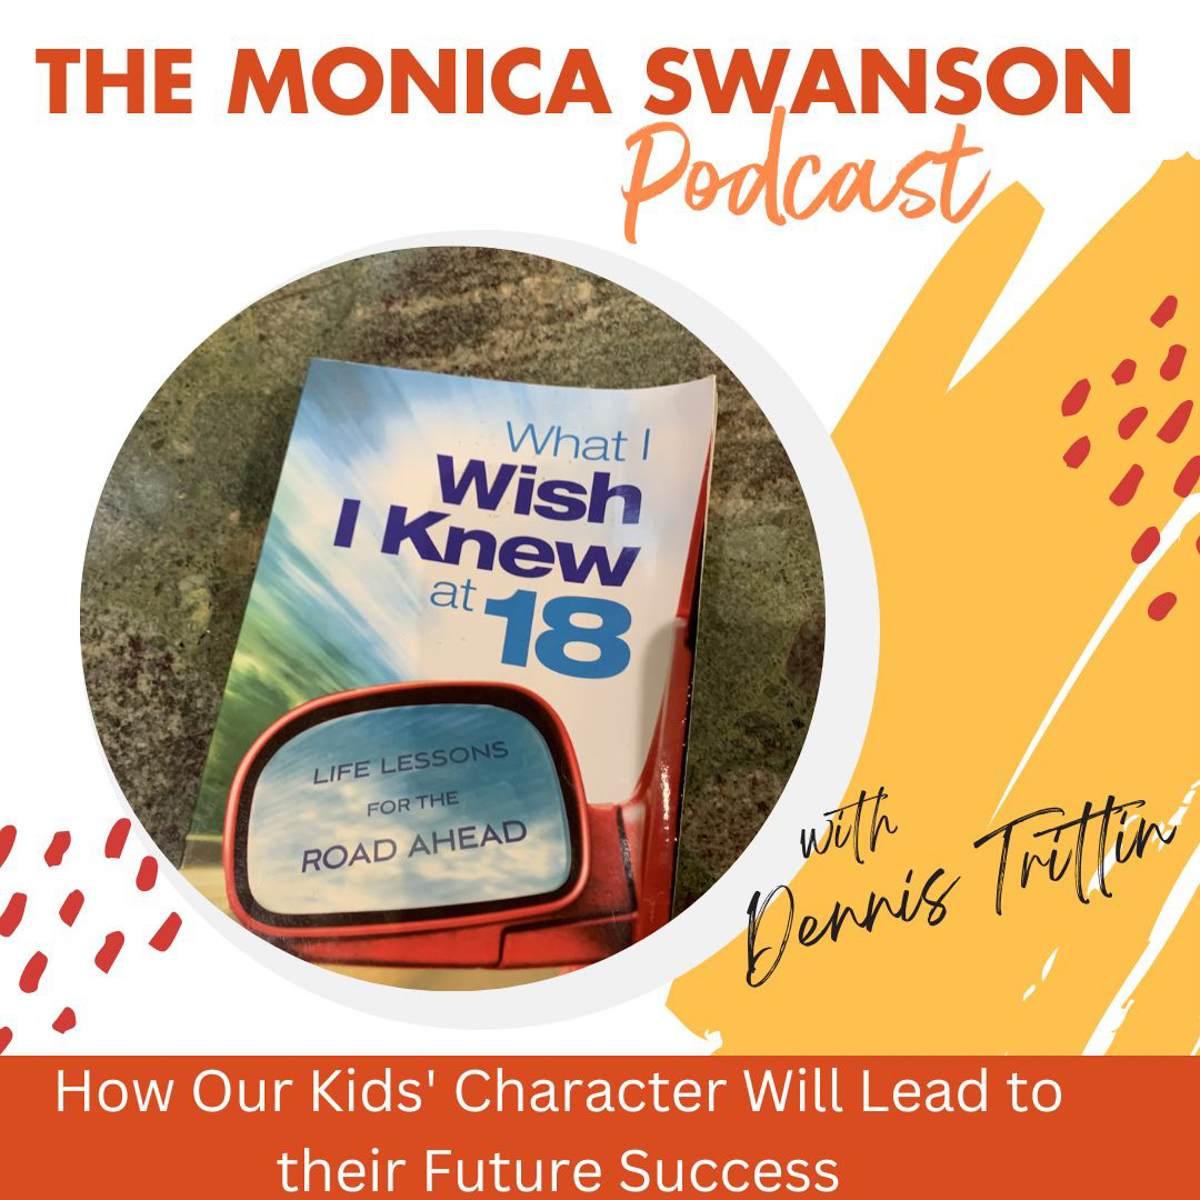 How Our Kids’ Character Will Lead to their Future Success, with Dennis Trittin